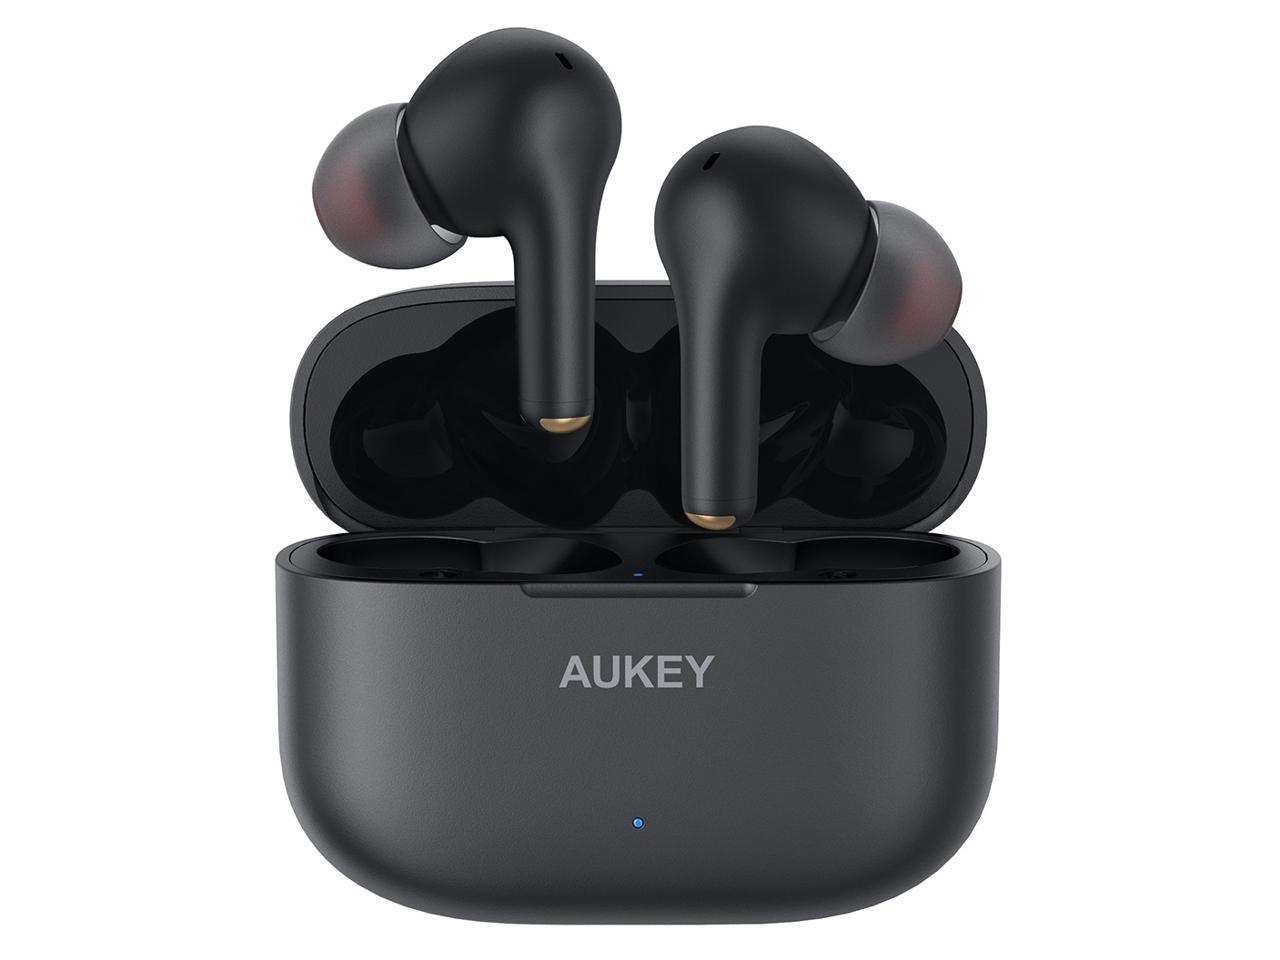 AUKEY Wireless Earbuds with aptX Deep Bass Sound 4 CVC 8.0 Reduction Bluetooth 5.0 Waterproof Type C Quick Case Earphones for iPhone and Android Black EP-T27 - Newegg.com